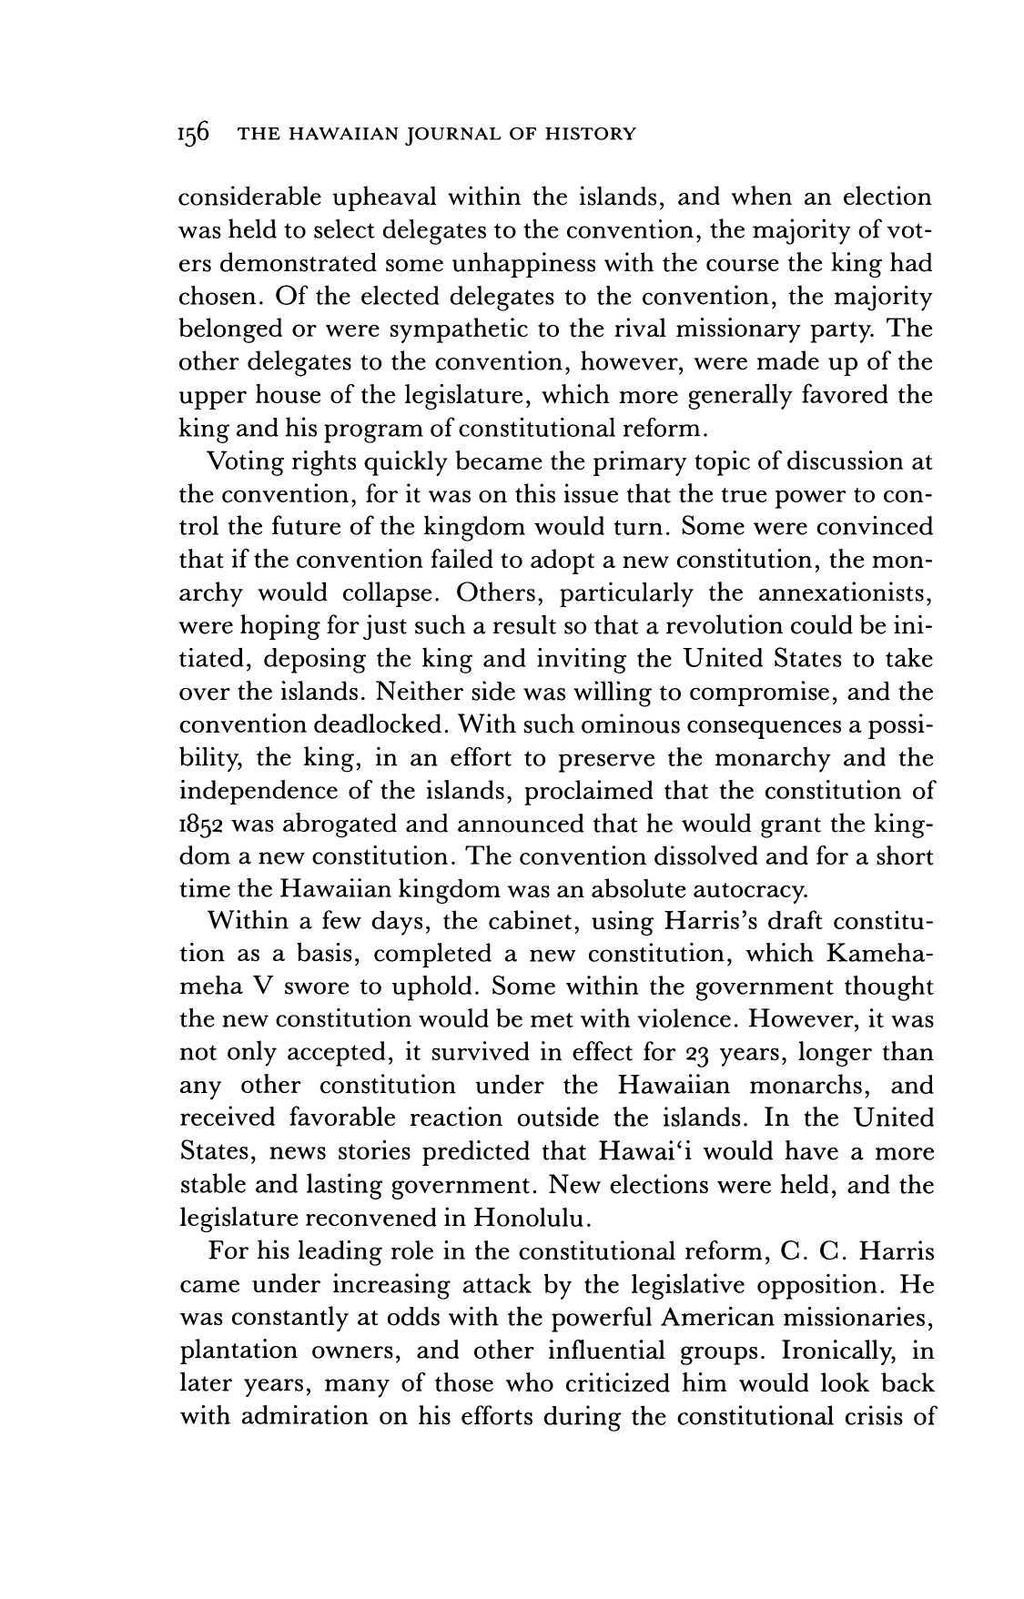 156 THE HAWAIIAN JOURNAL OF HISTORY considerable upheaval within the islands, and when an election was held to select delegates to the convention, the majority of voters demonstrated some unhappiness